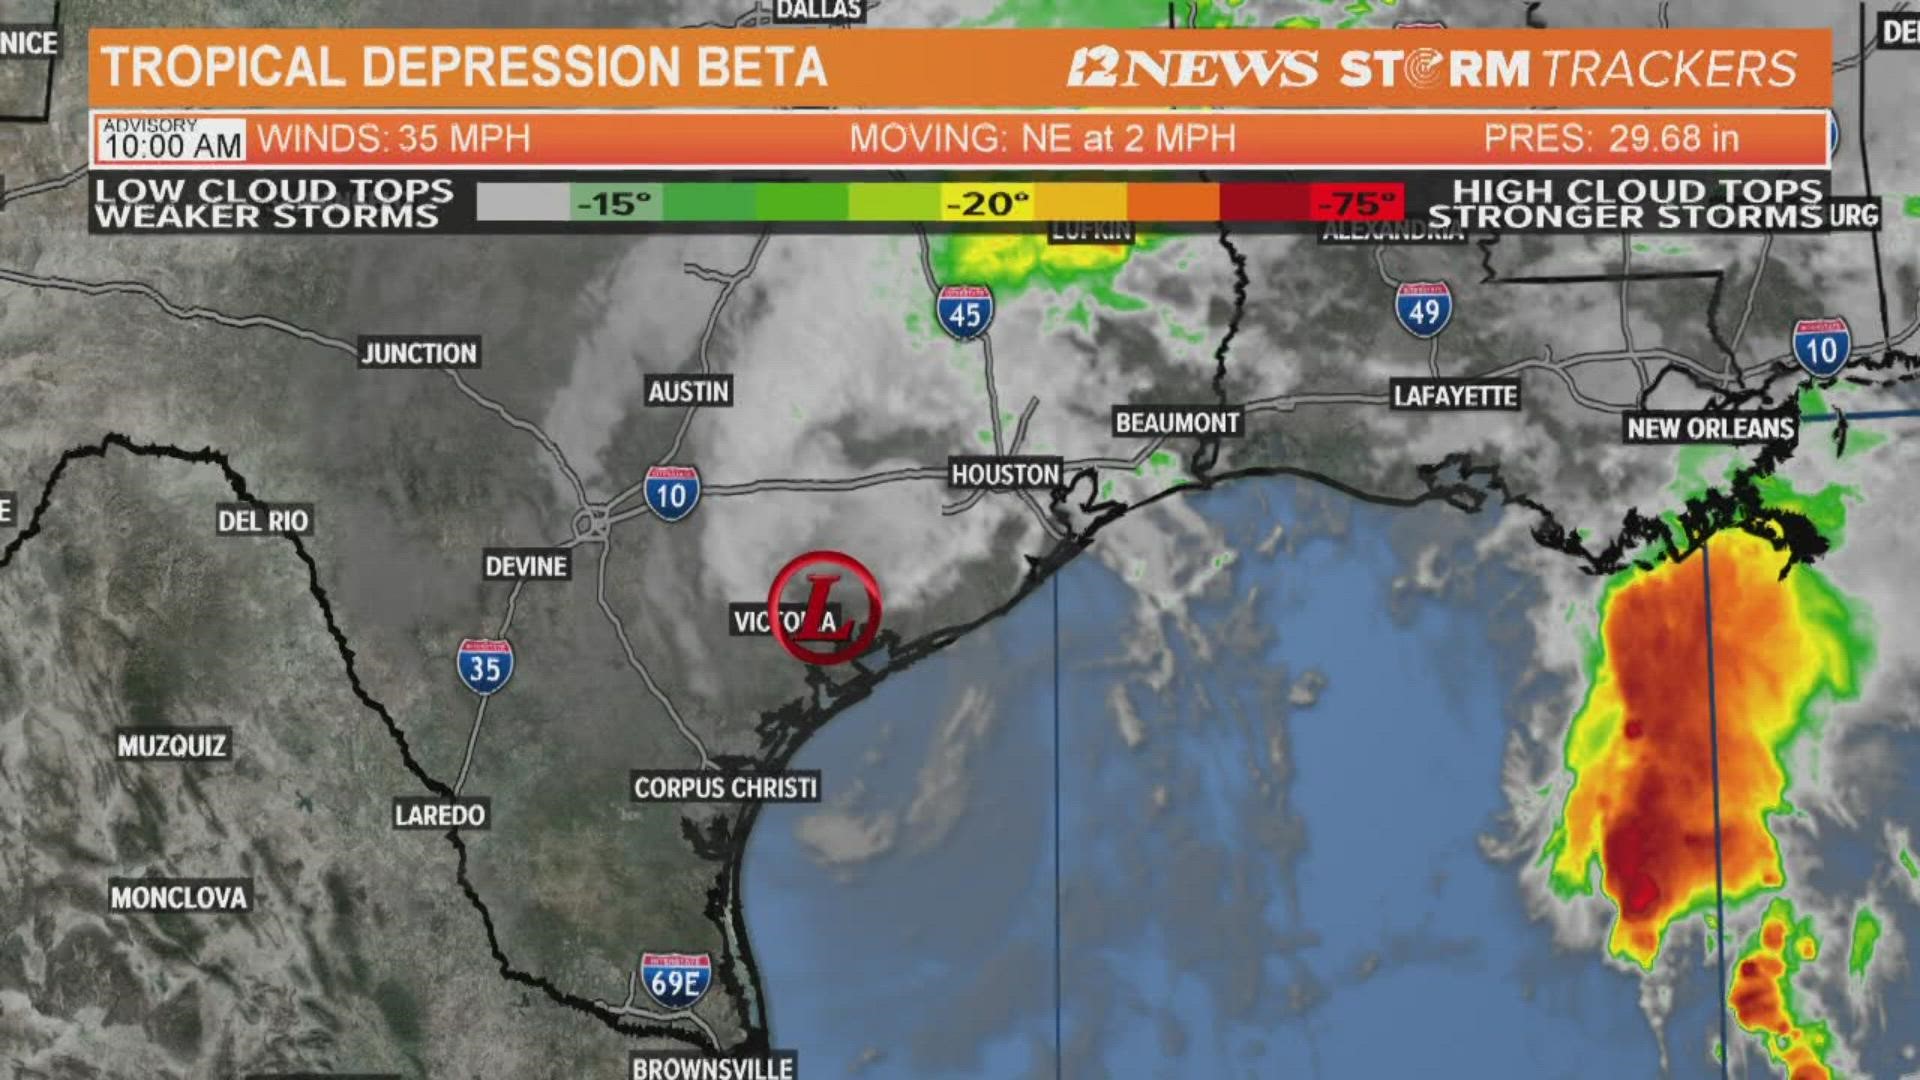 Tropical Storm Beta has been downgraded to a depression following its overnight landfall near Port Lavaca.